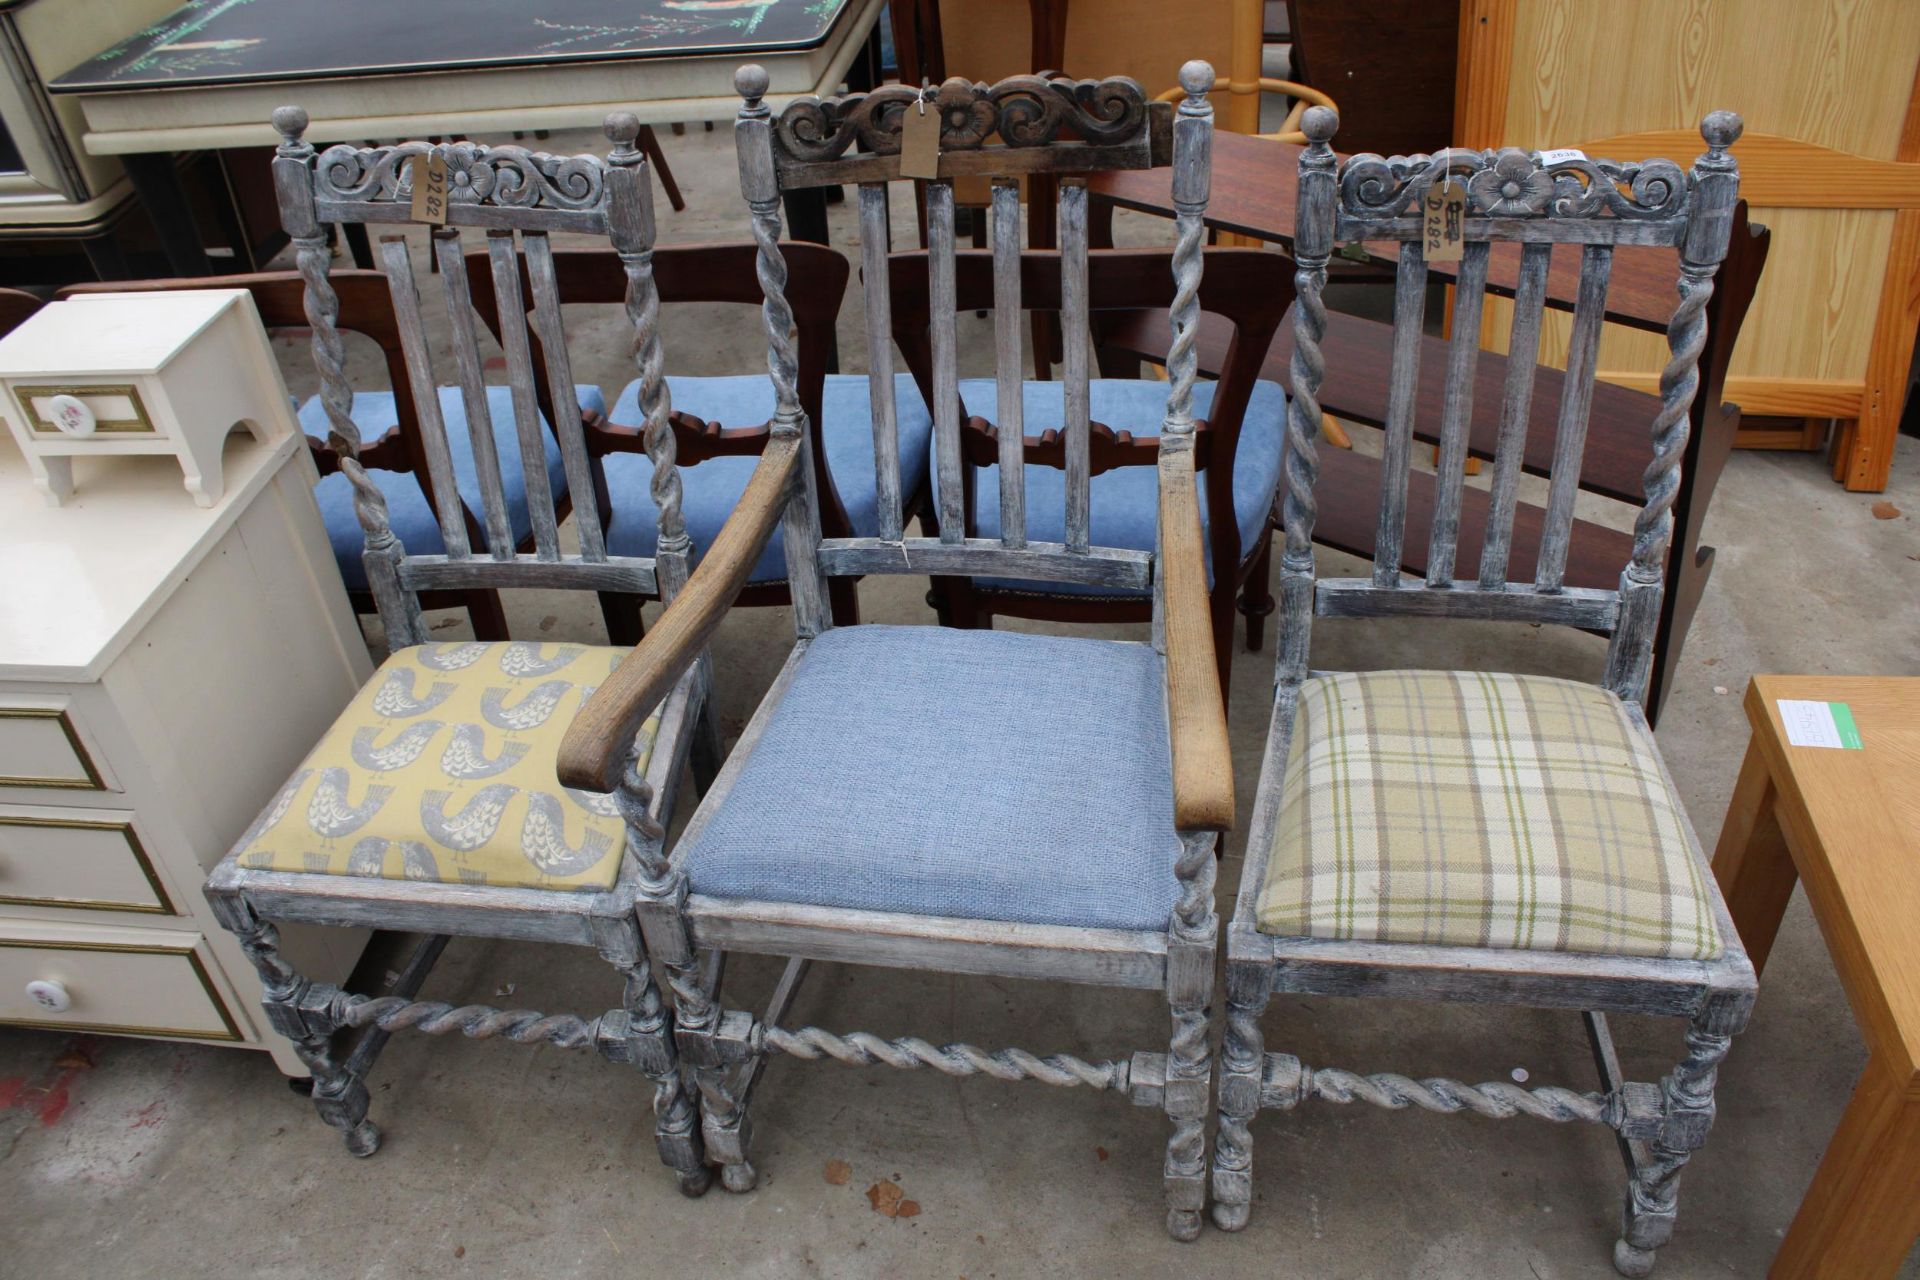 THREE EARLY 20TH CENTURY OAK SHABBY CHIC BARLEY-TWIST DINING CHAIRS, ONE BEING A CARVER